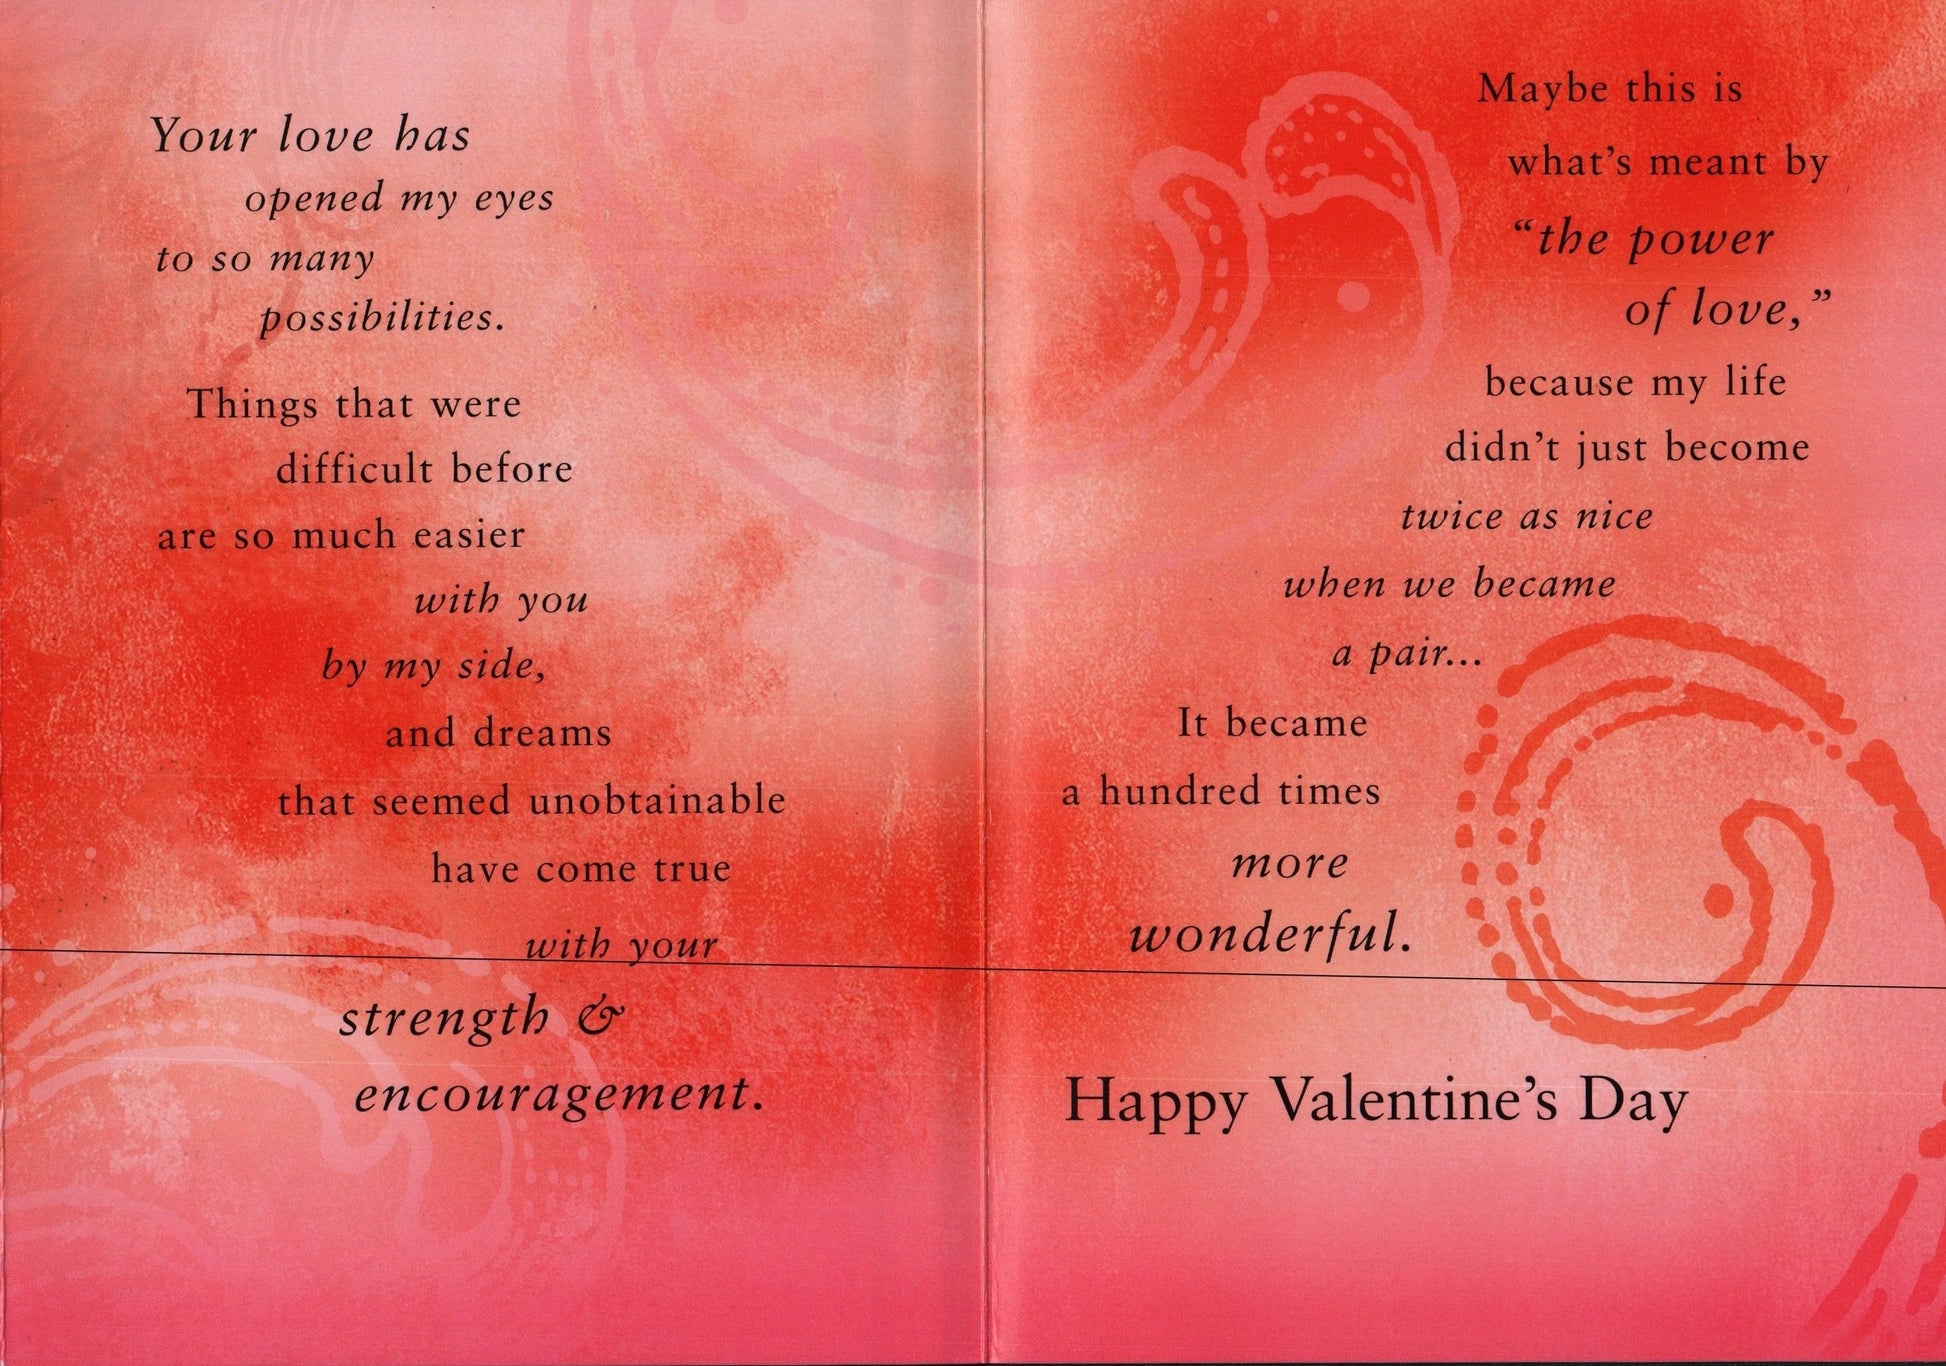 One I Love Valentine's Day Card - Shelburne Country Store